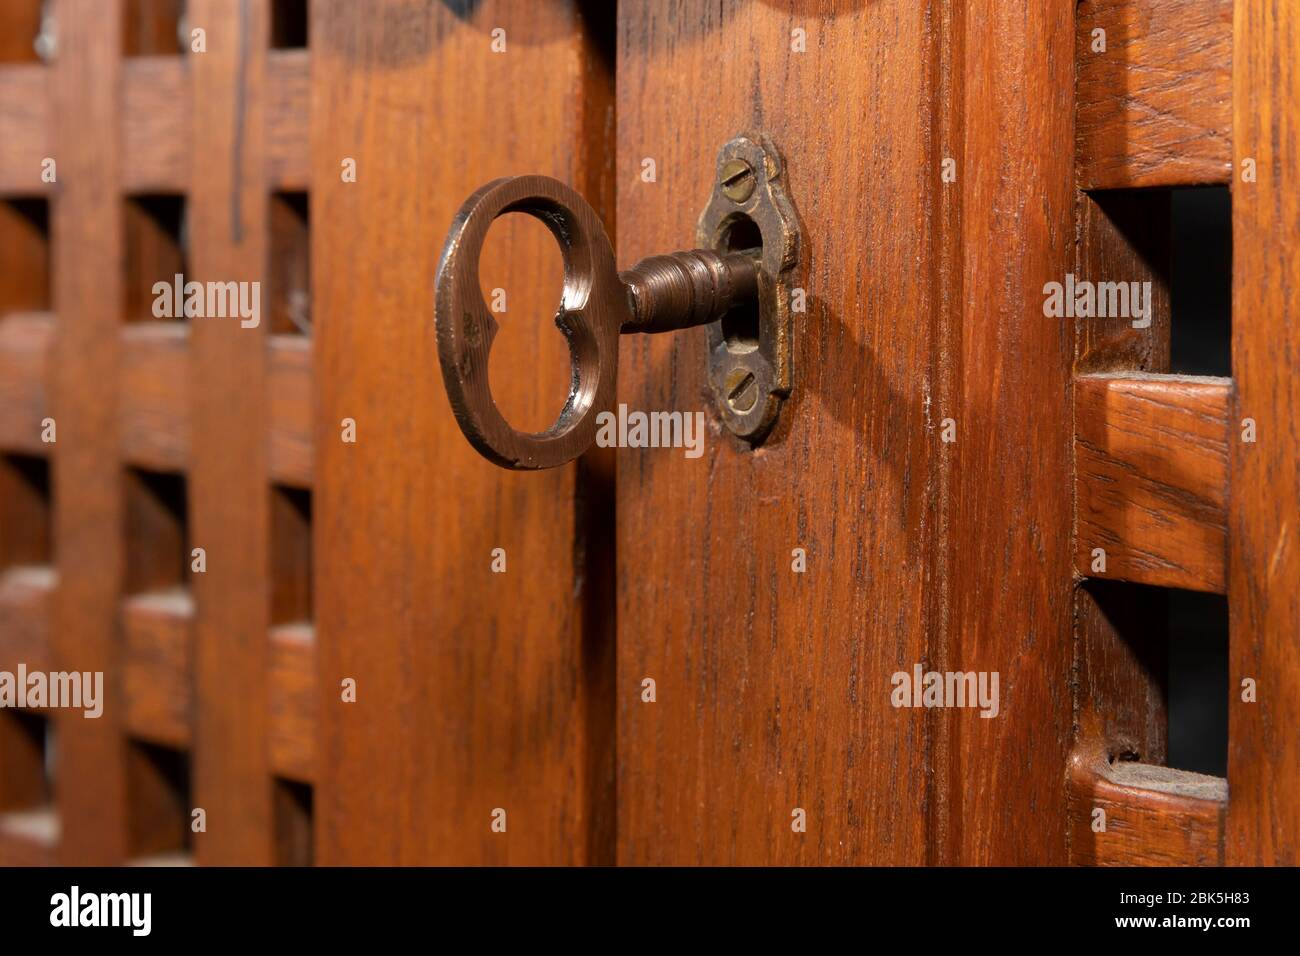 An antique key in an old wooden cupboard Stock Photo